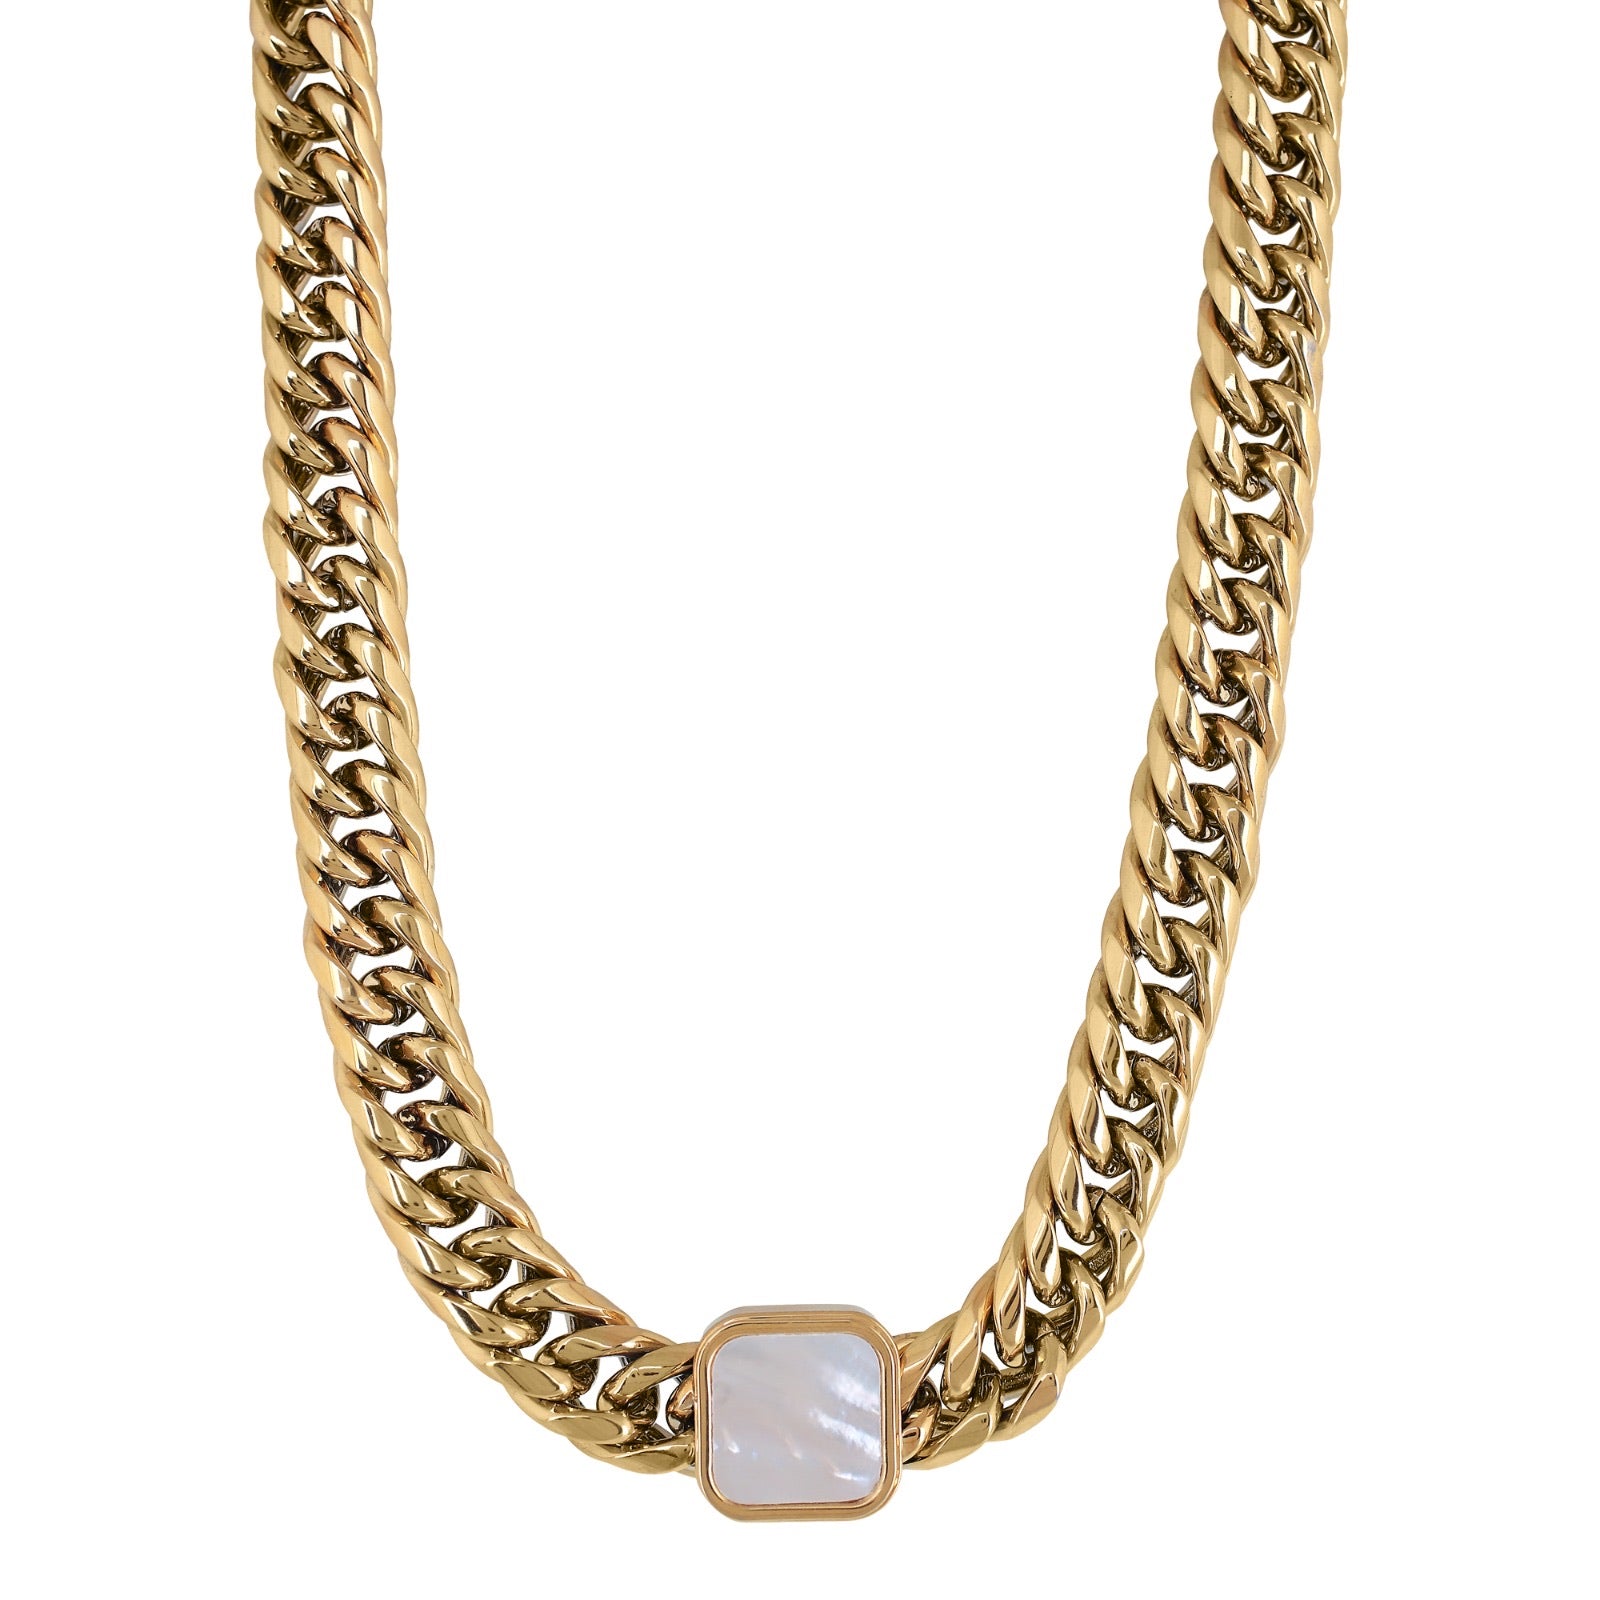 'POLAR' CHUNKY CHAIN NECKLACE WITH MOTHER PEARL